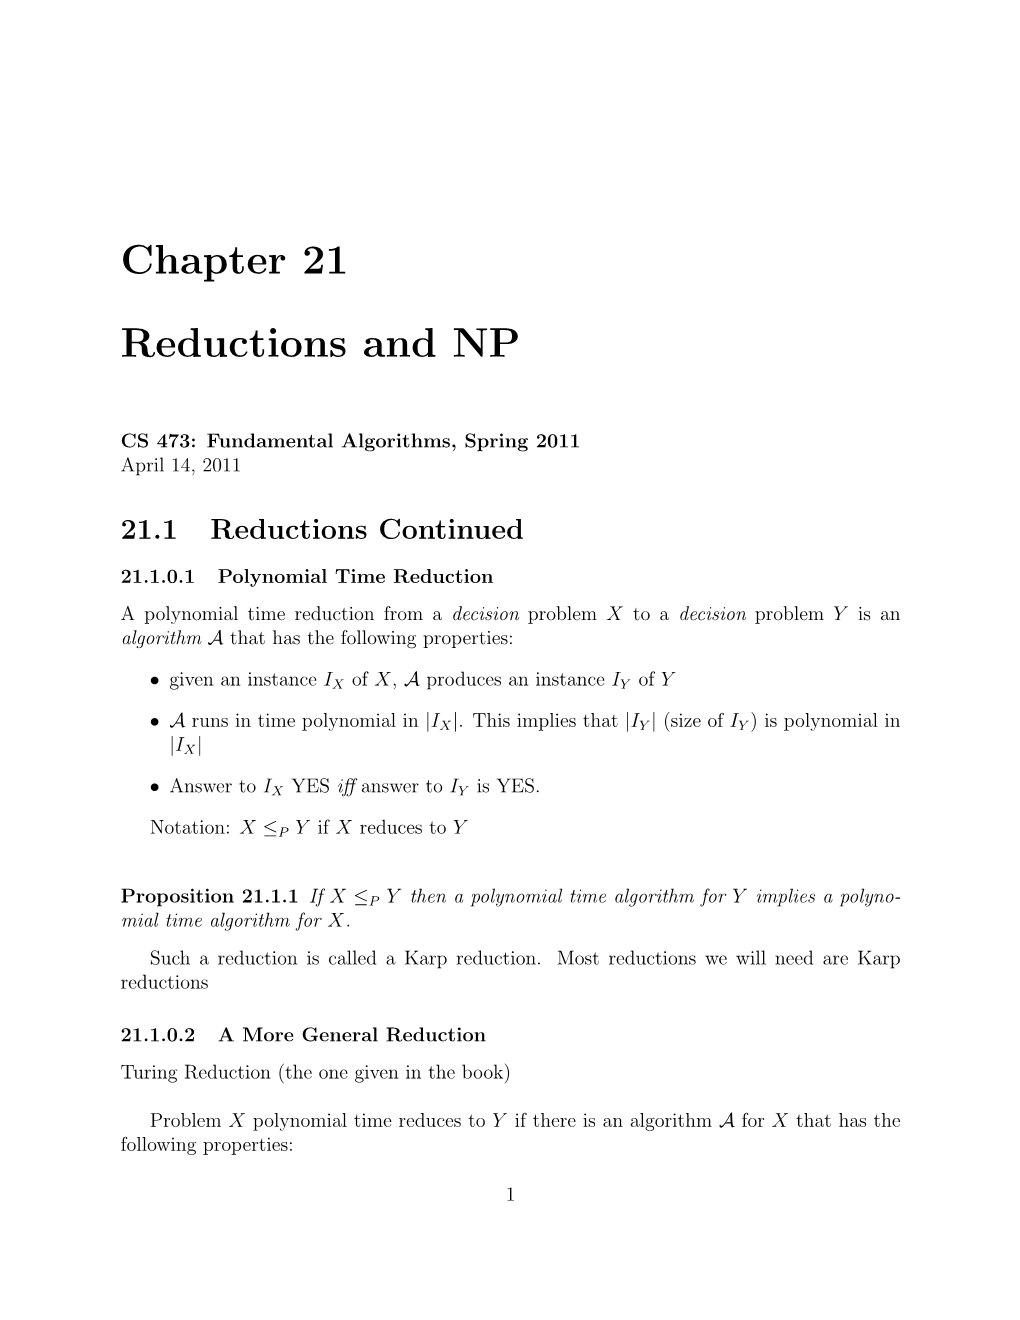 Chapter 21 Reductions and NP